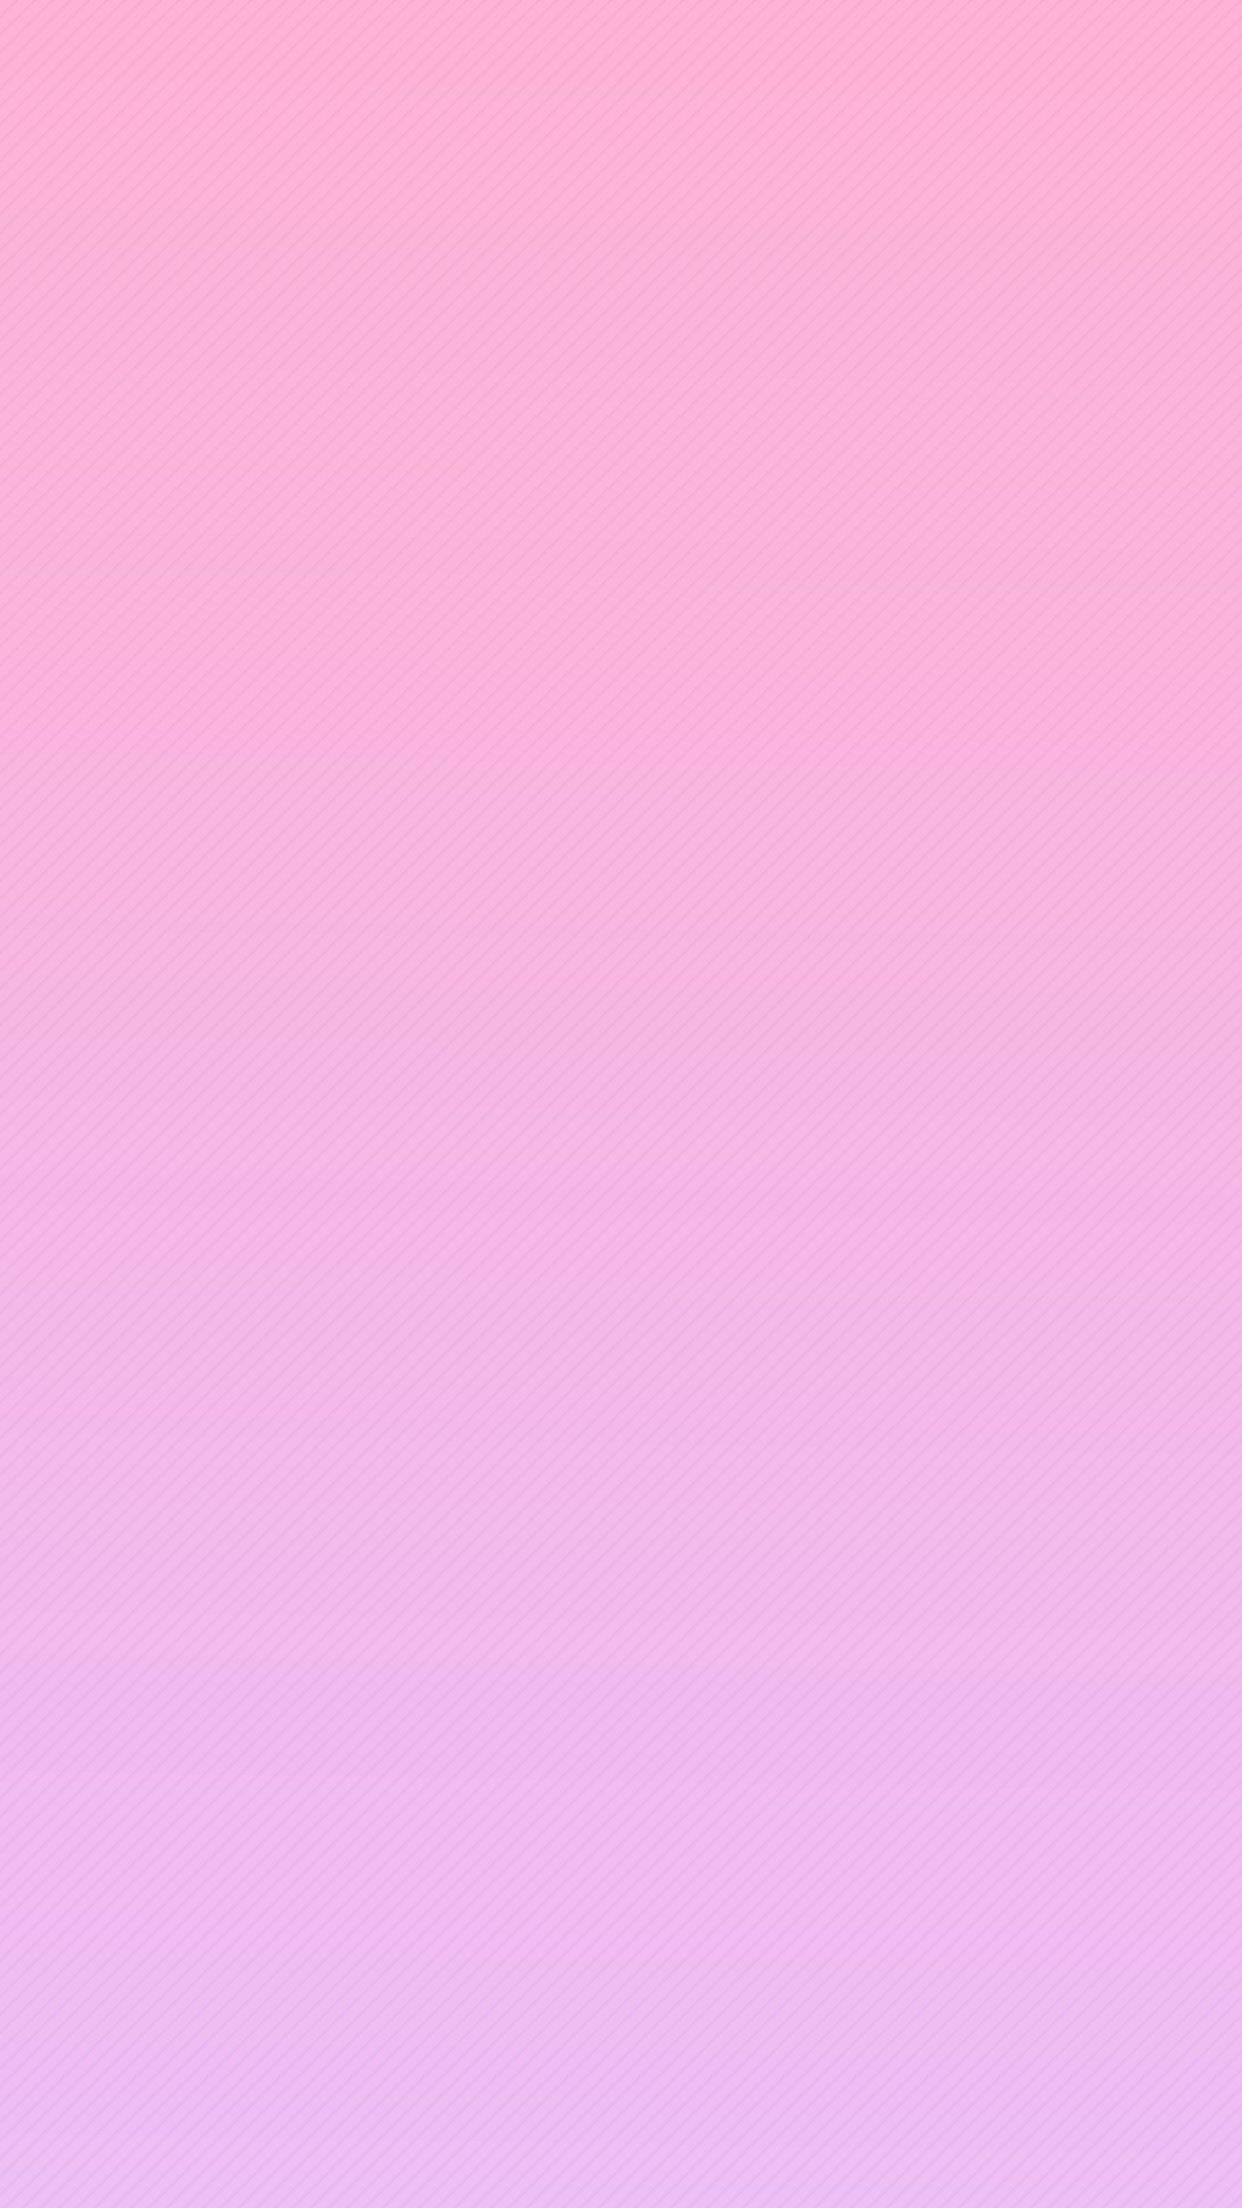 Red Pink Gradient Android Wallpapers - Wallpaper Cave